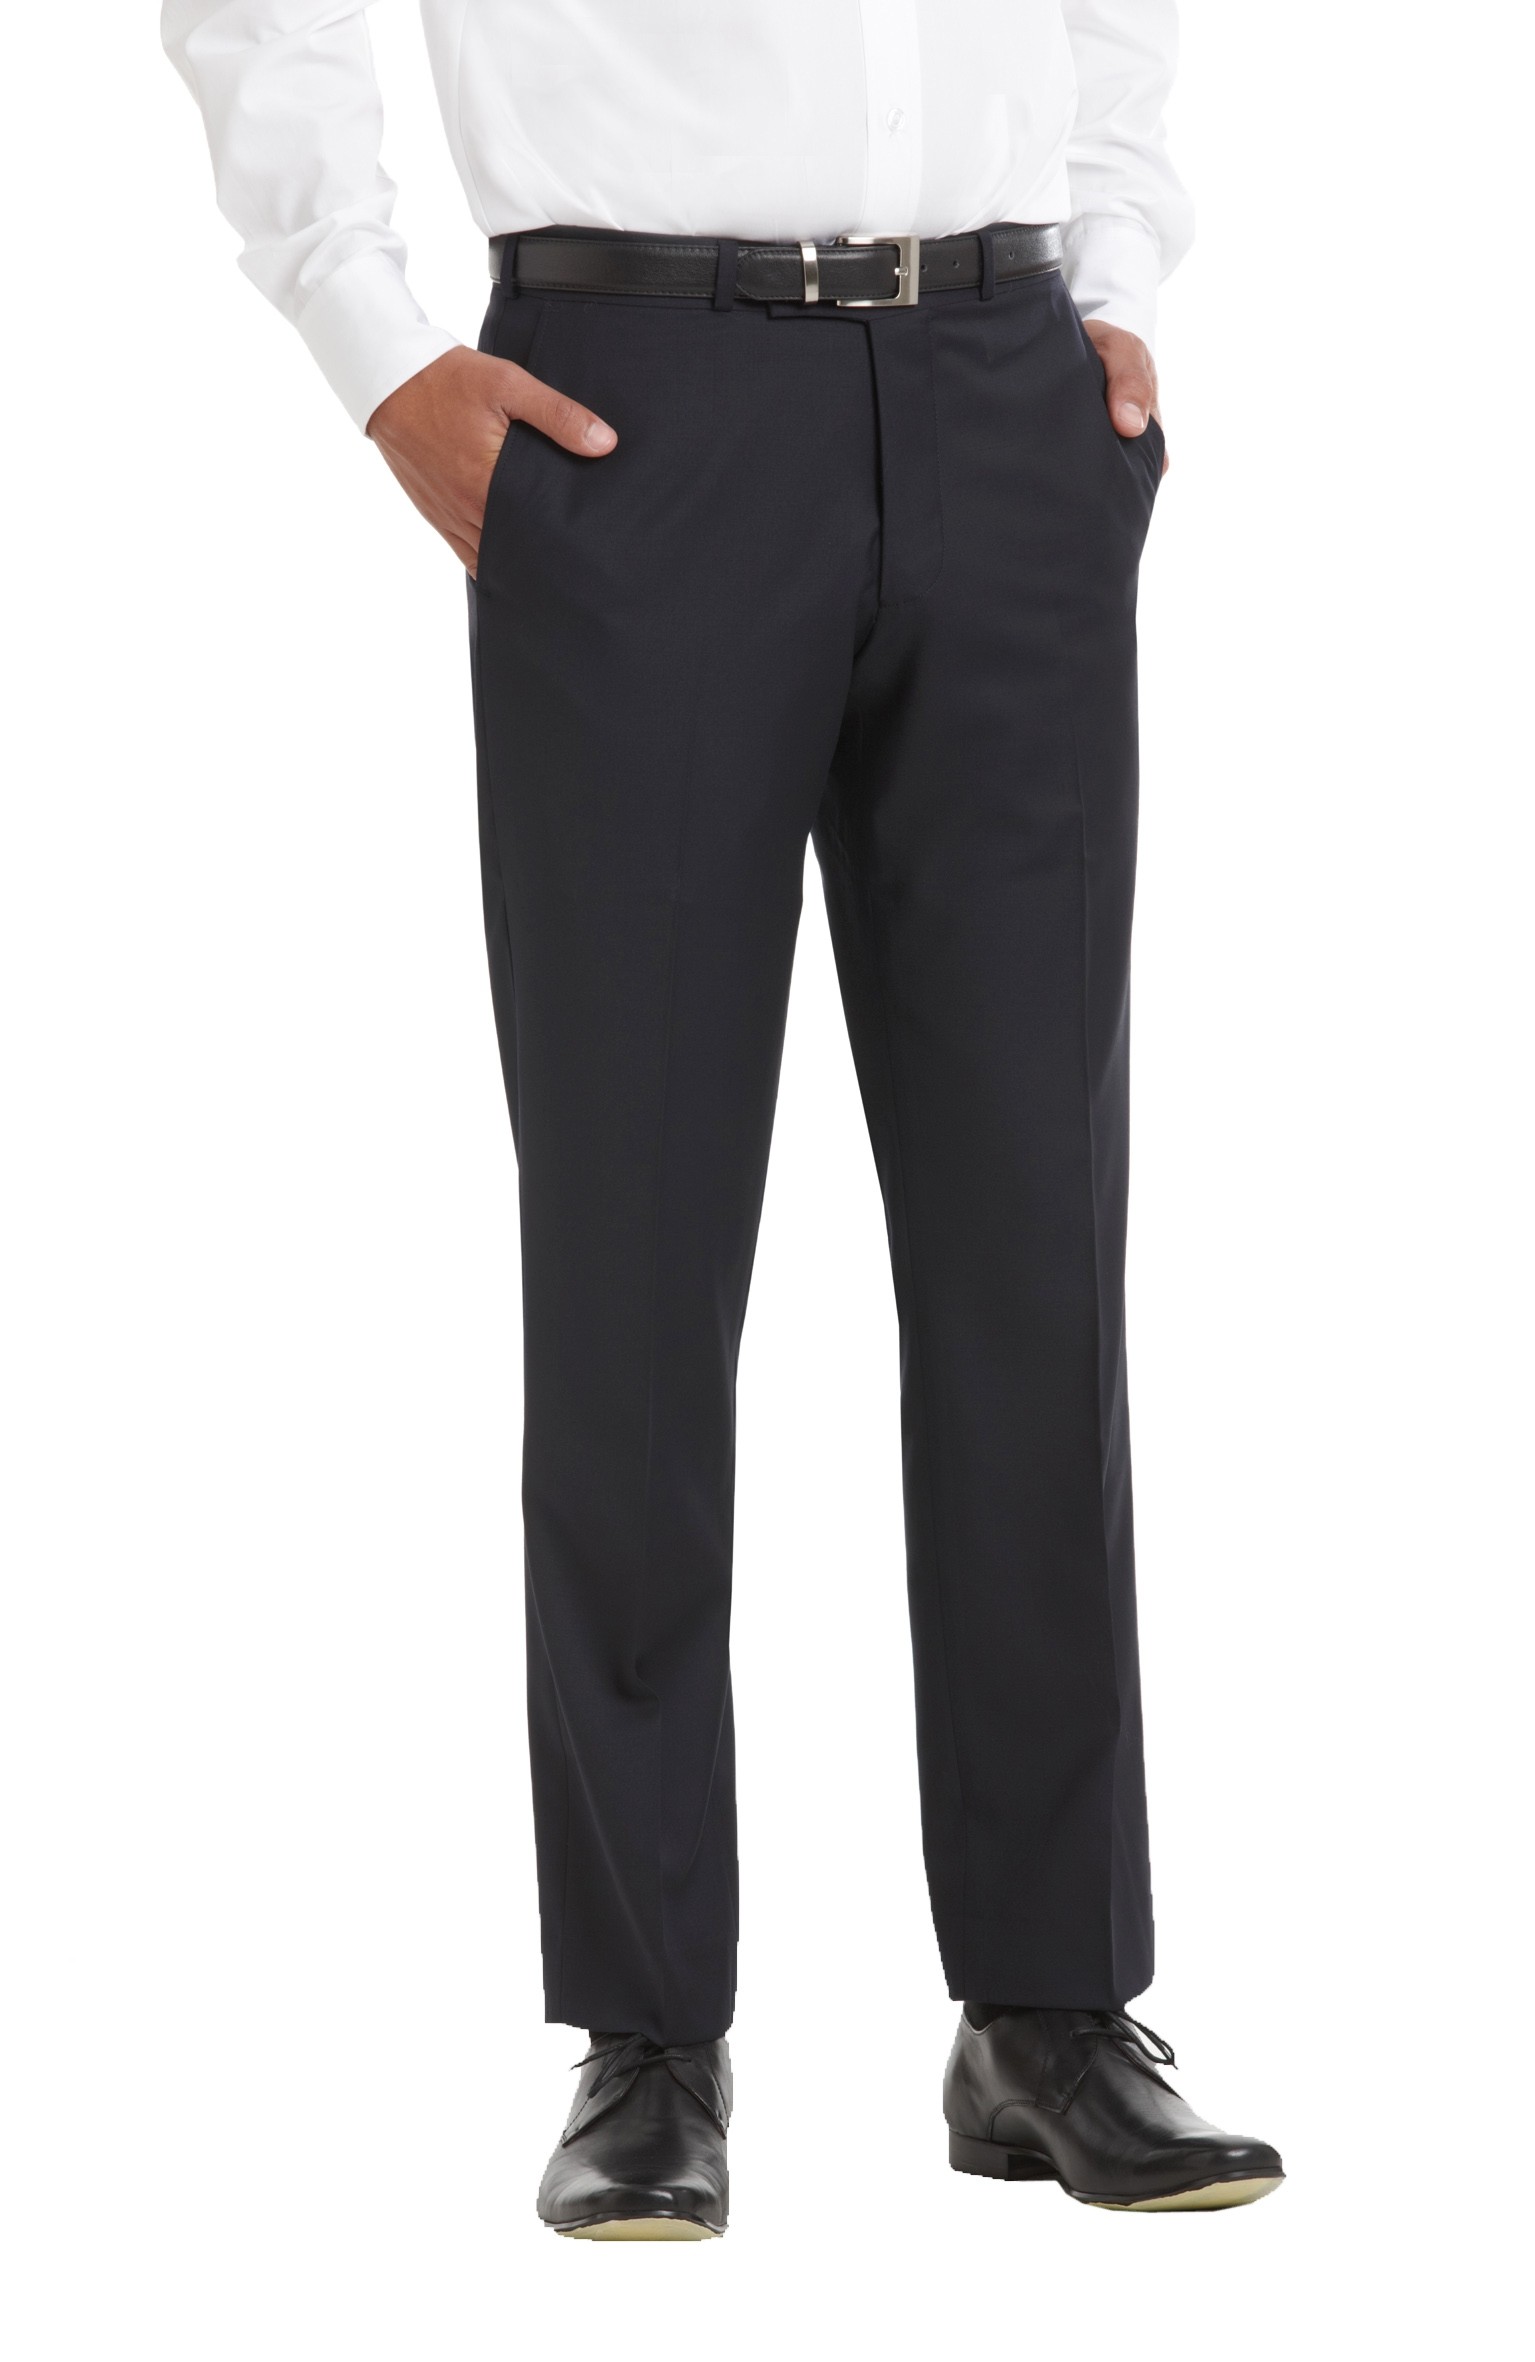 Buy CLEARANCE - Men's Navy Tailored Plain Front Wool Rich Trousers in ...